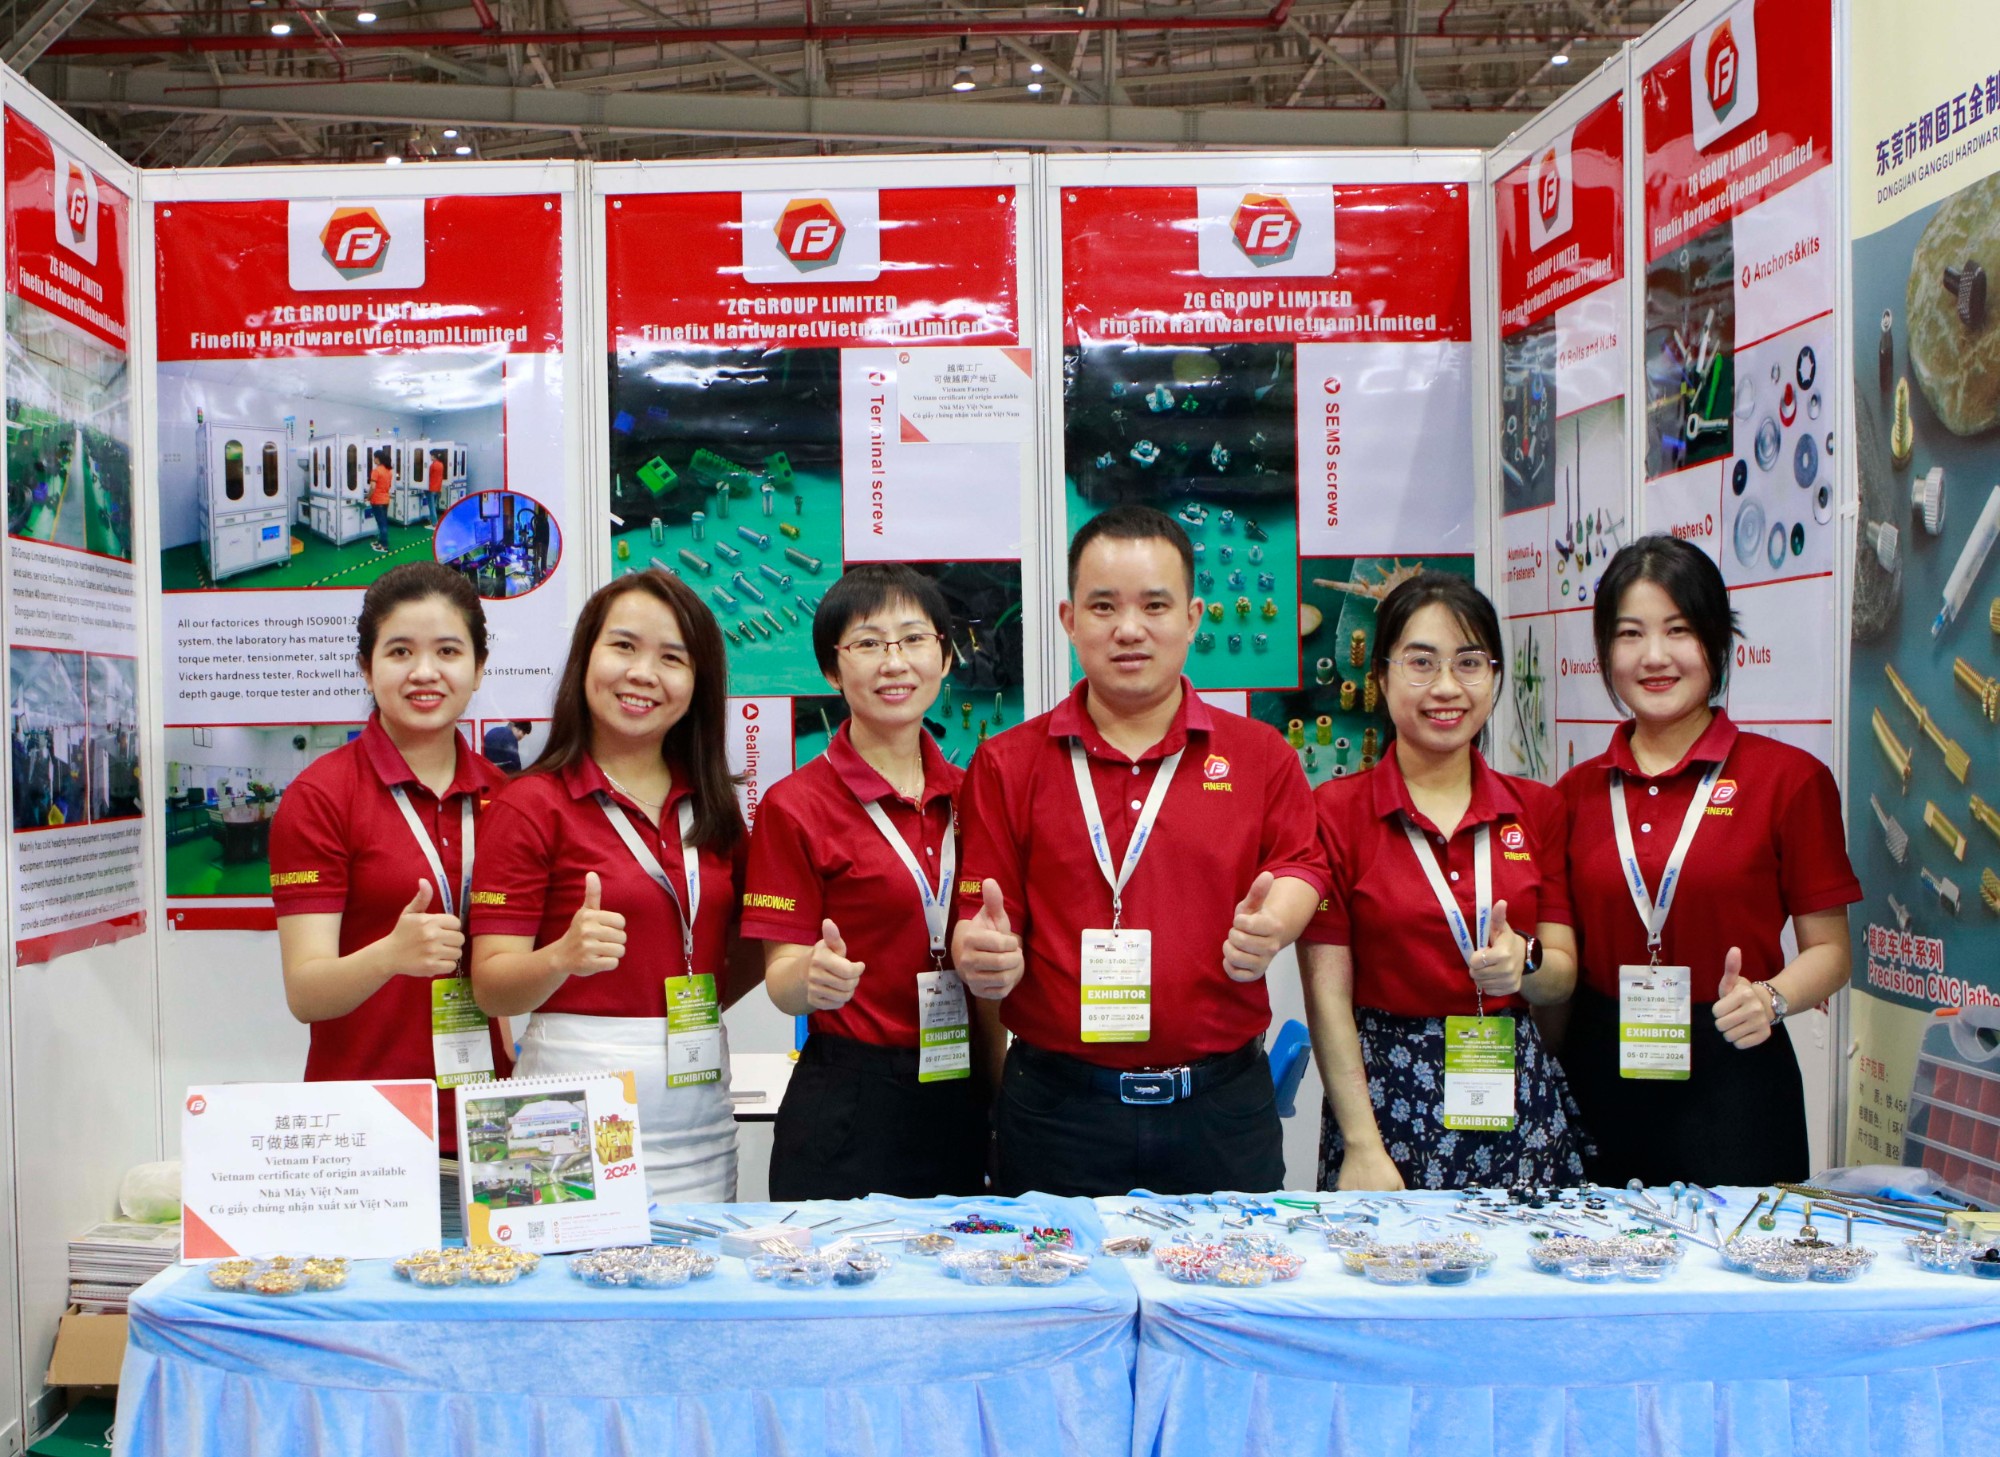 Finefix participated in the international exhibition of Hardware Products and Hand Tools 2023 from December 7 to December 9